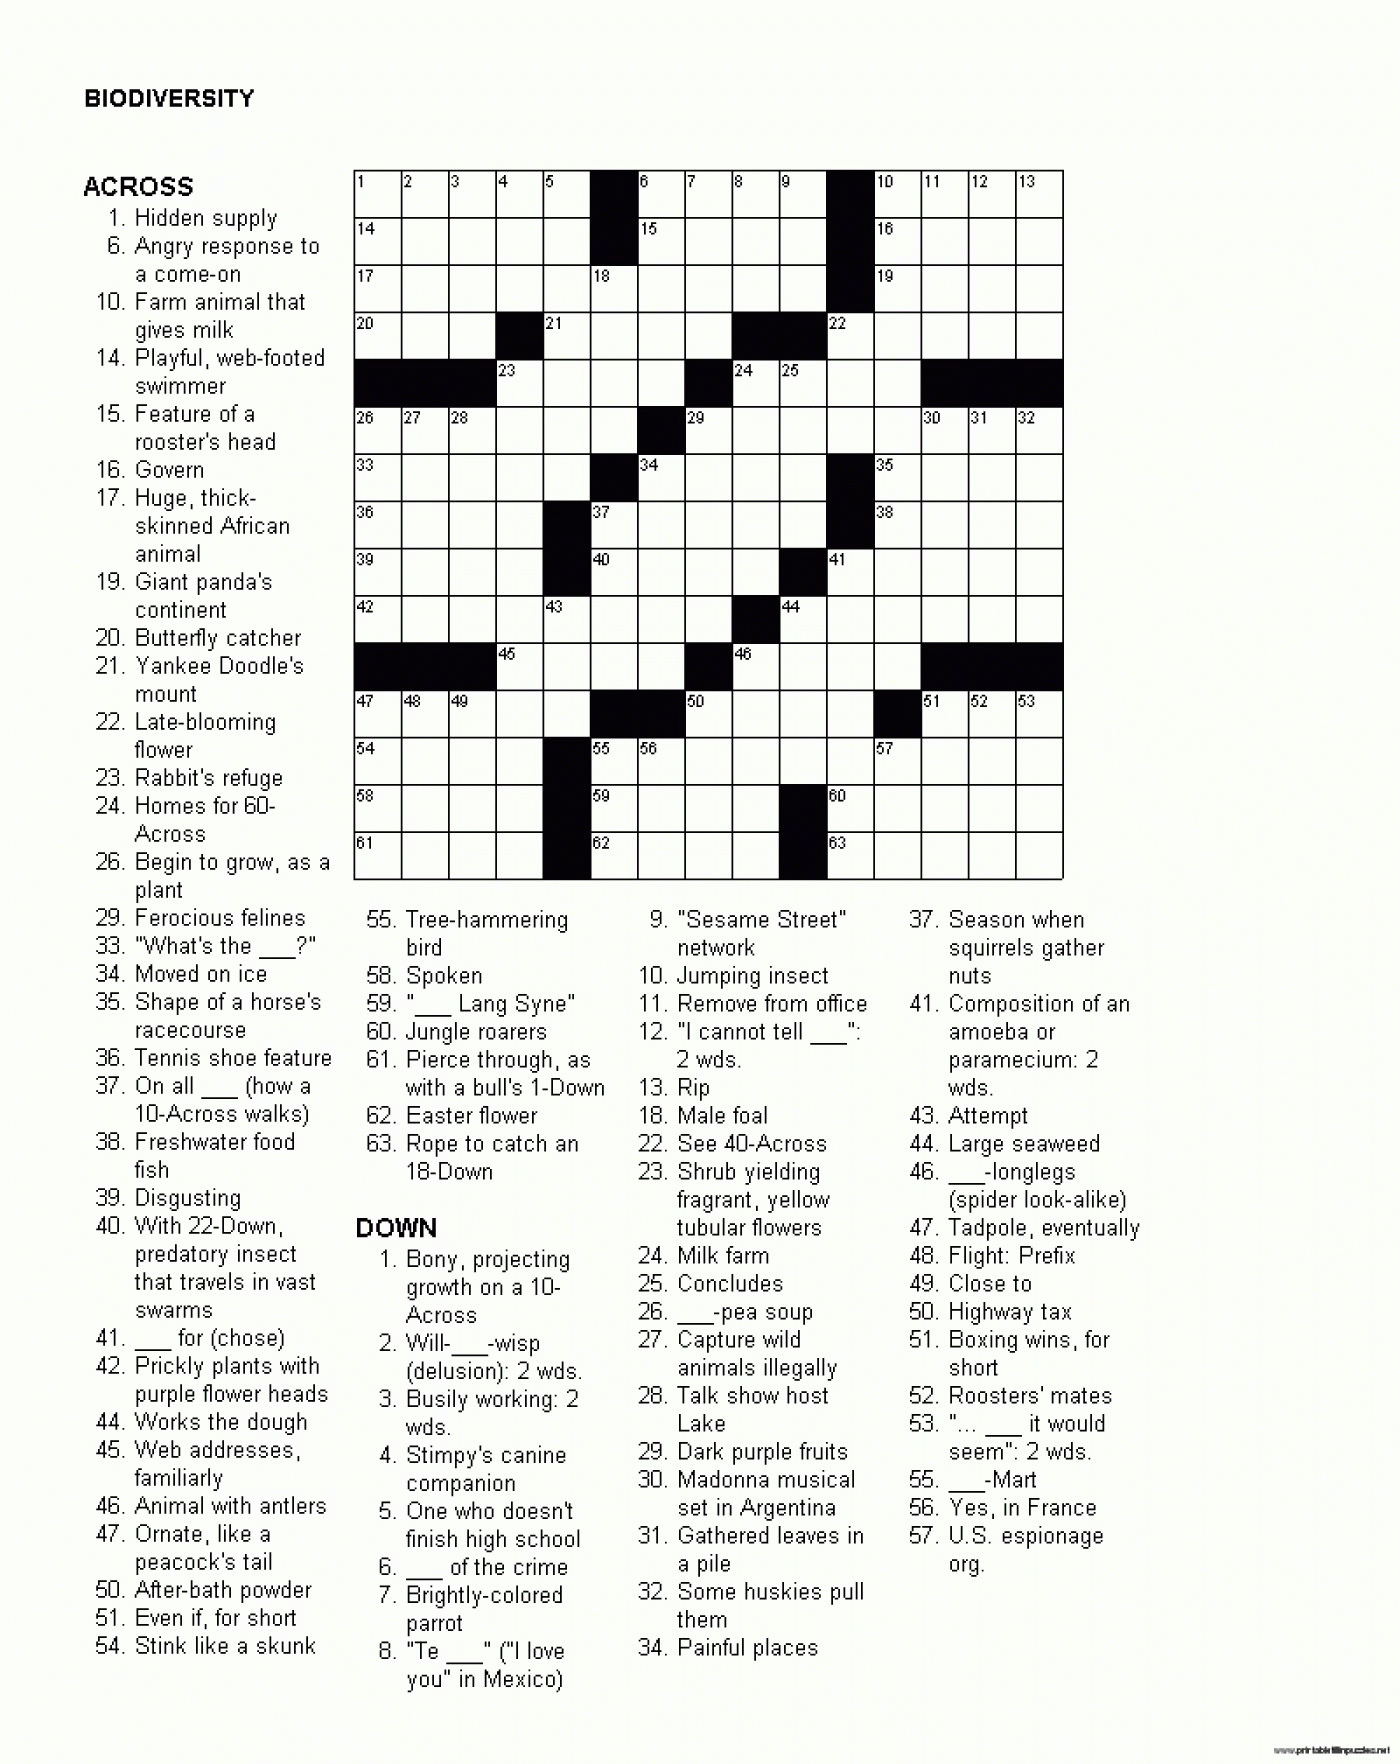 Free Print Bible Crossword Puzzle - Christian Family Bible Wordsearch Its Needed But Often Not Included Crossword